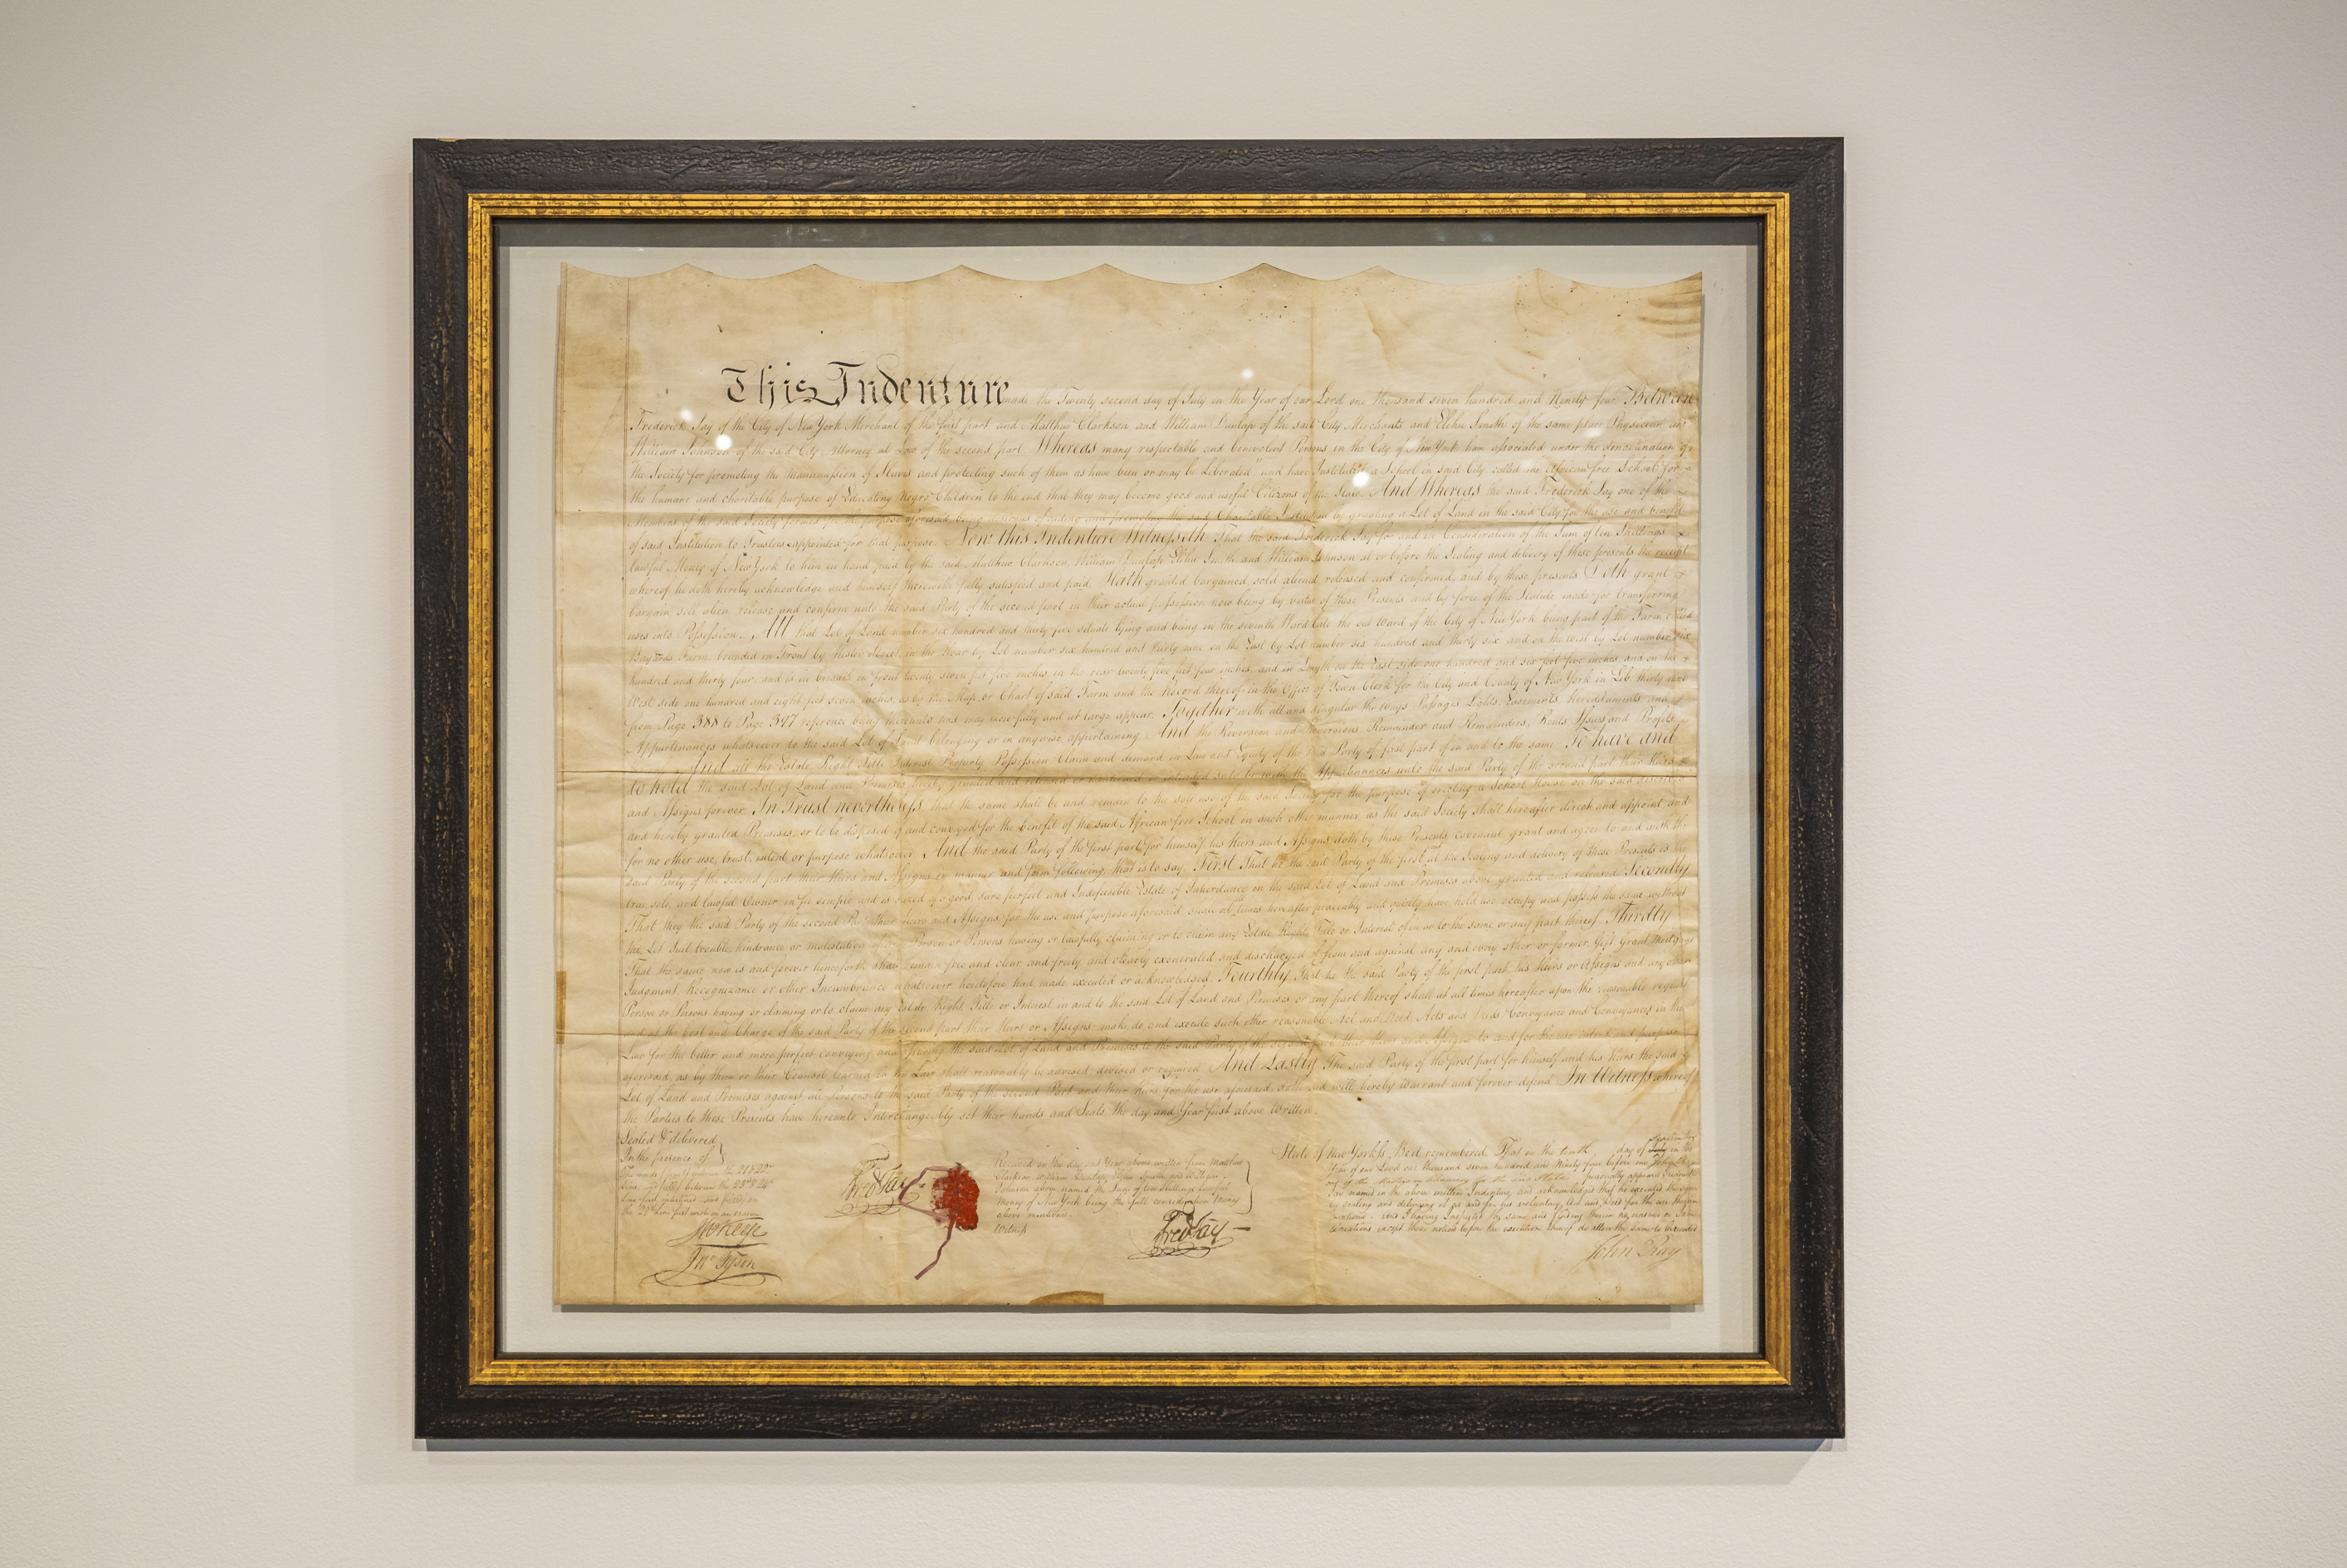 A 1794 land deed for the first African Free School location in lower Manhattan. (Courtesy of Sotheby's)